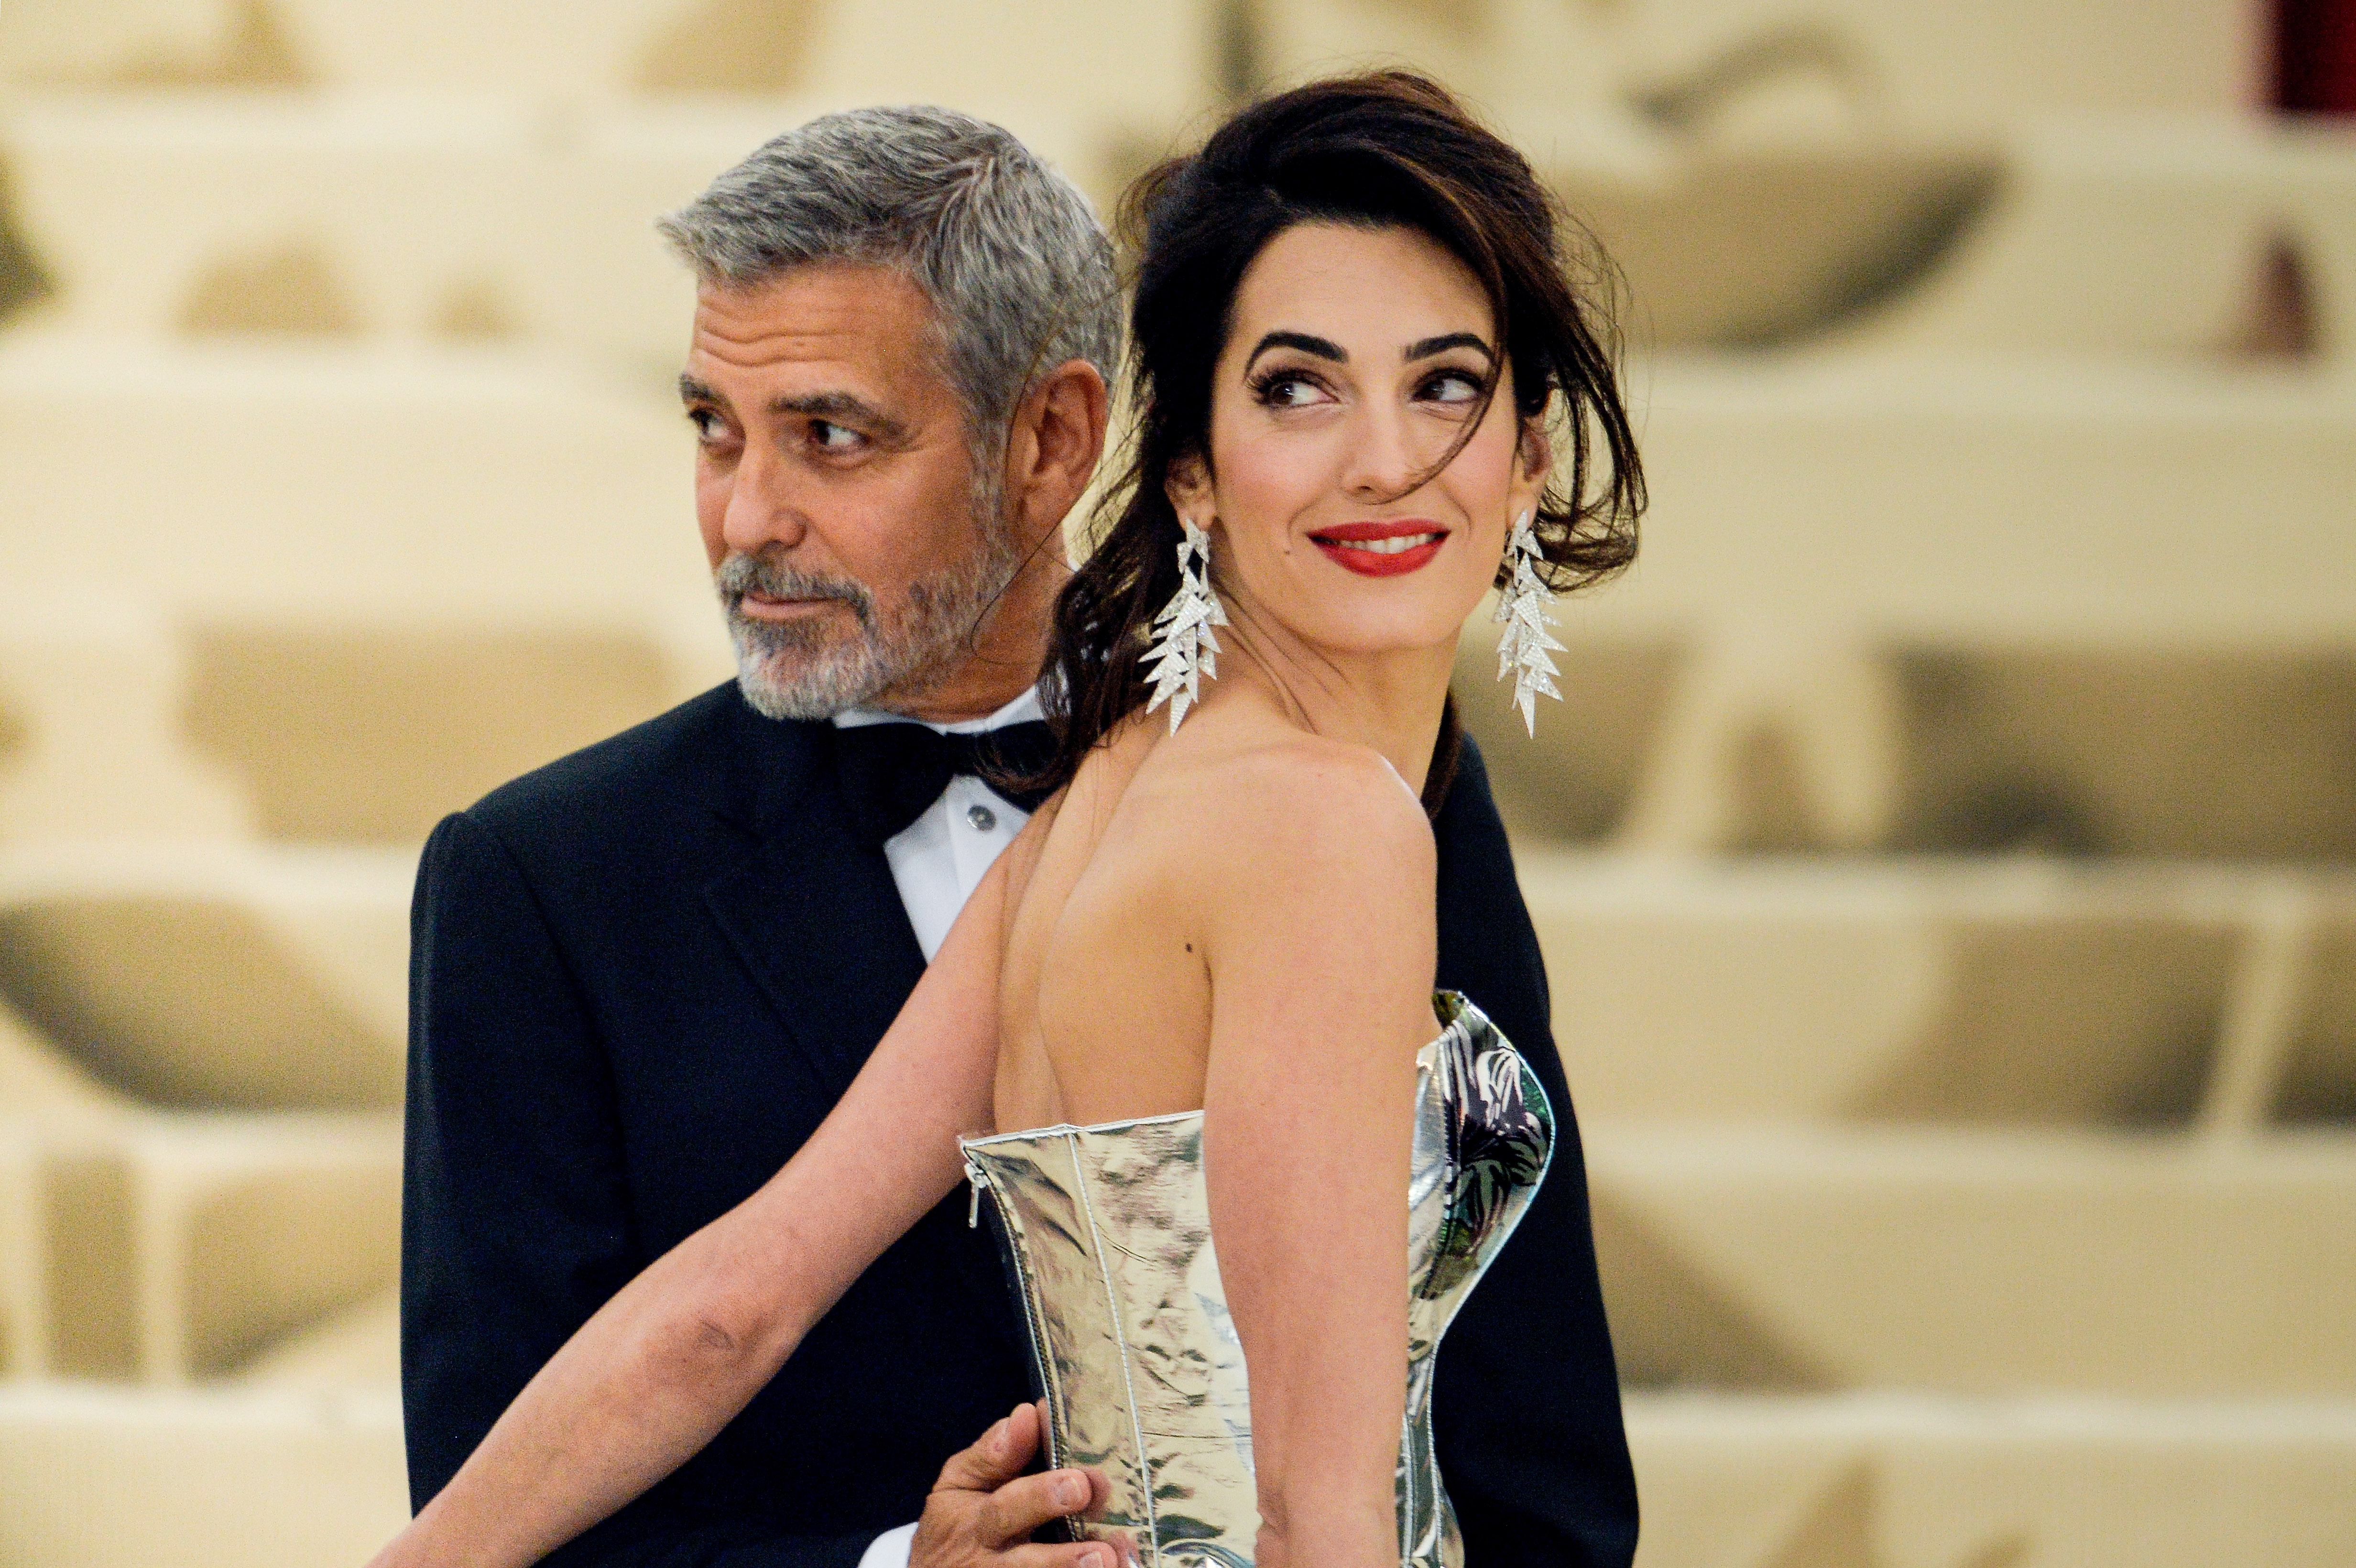 Actor George Clooney and lawyer Amal Clooney enter the Heavenly Bodies: Fashion & The Catholic Imagination Costume Institute Gala at The Metropolitan Museum on May 7, 2018 in New York City | Source: Getty Images